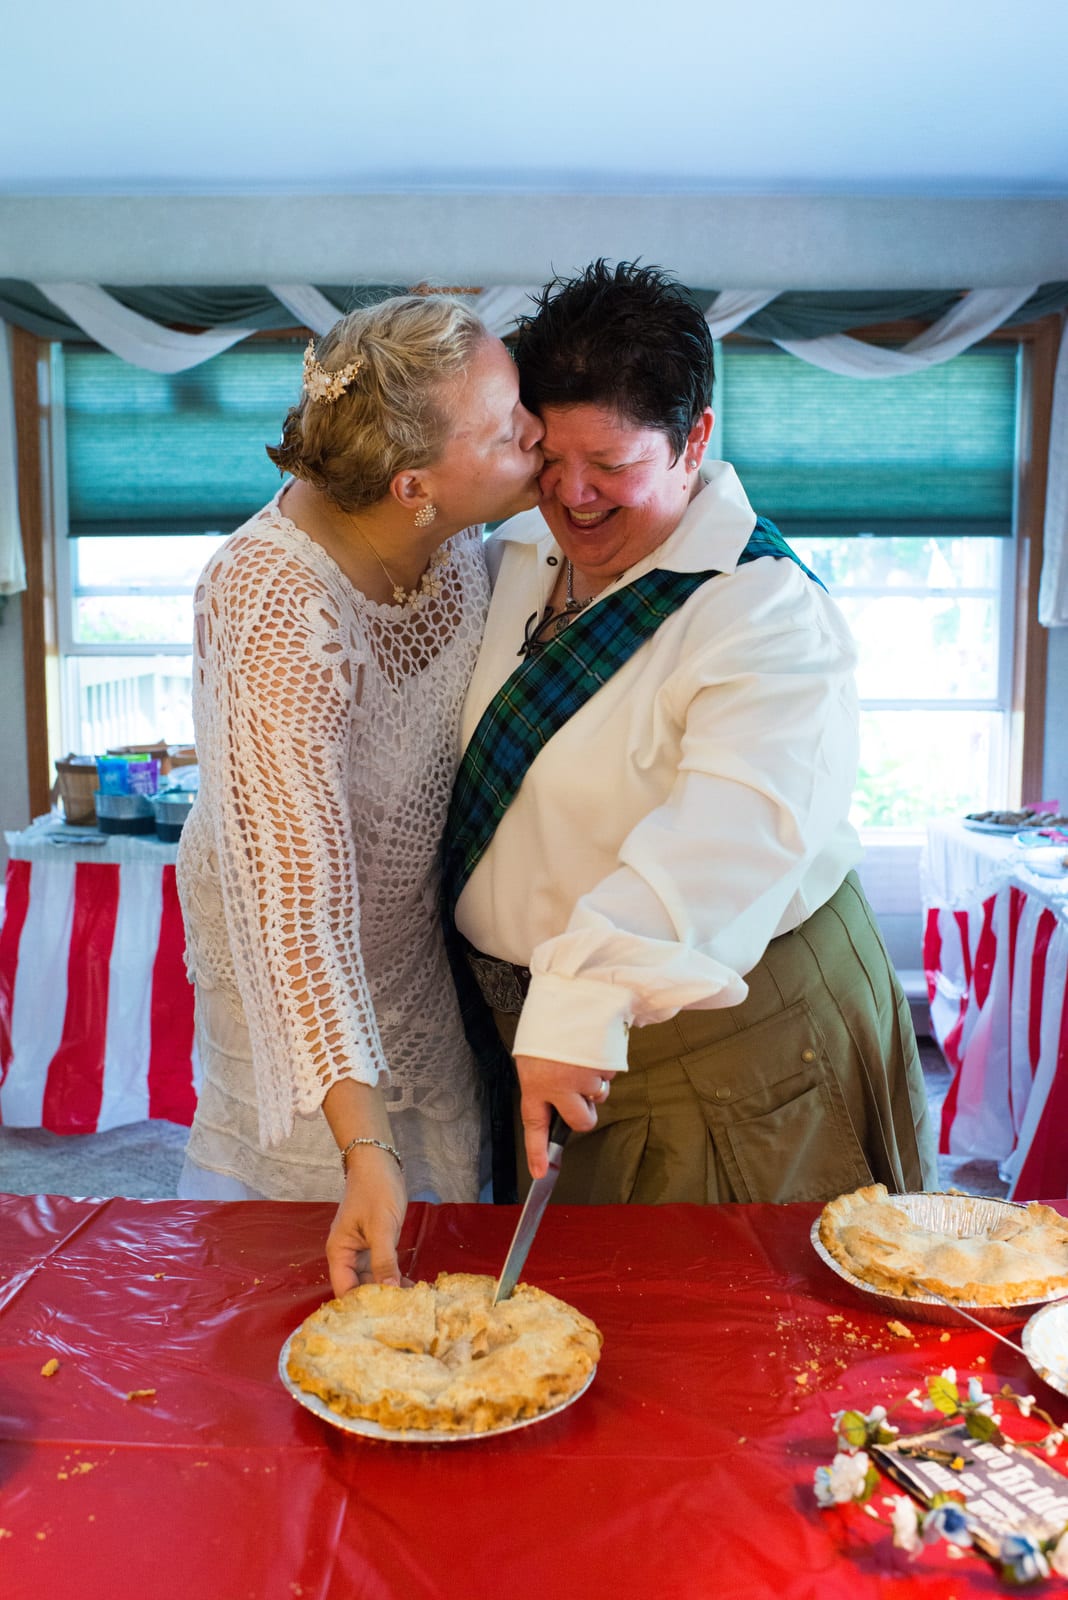 Two brides cut a pie during their wedding. One of the brides kisses the cheek of the other.